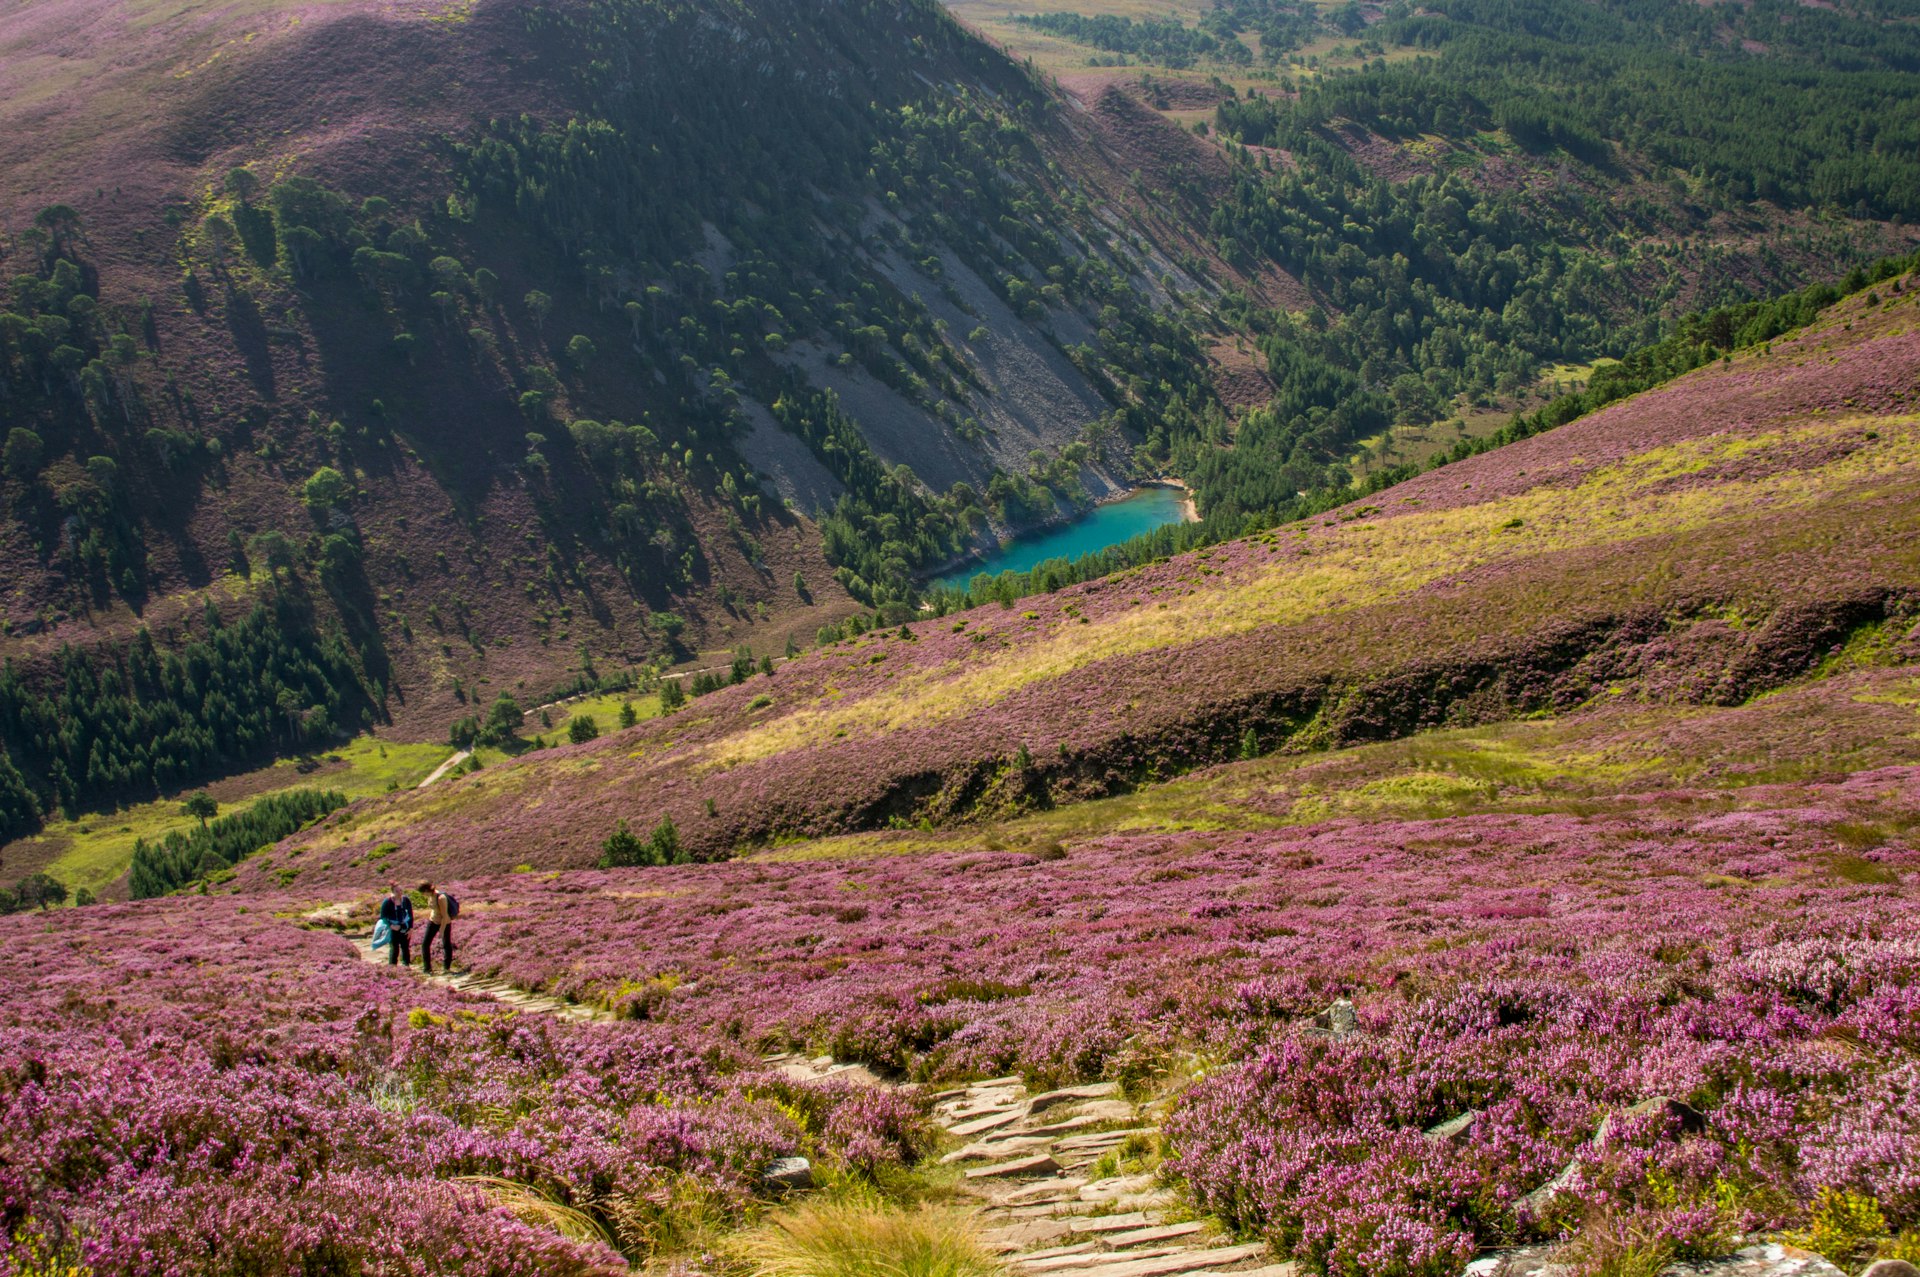 A rolling hill of purple heather leads to a bright green body of water in the valley below. Hikers are following paths.